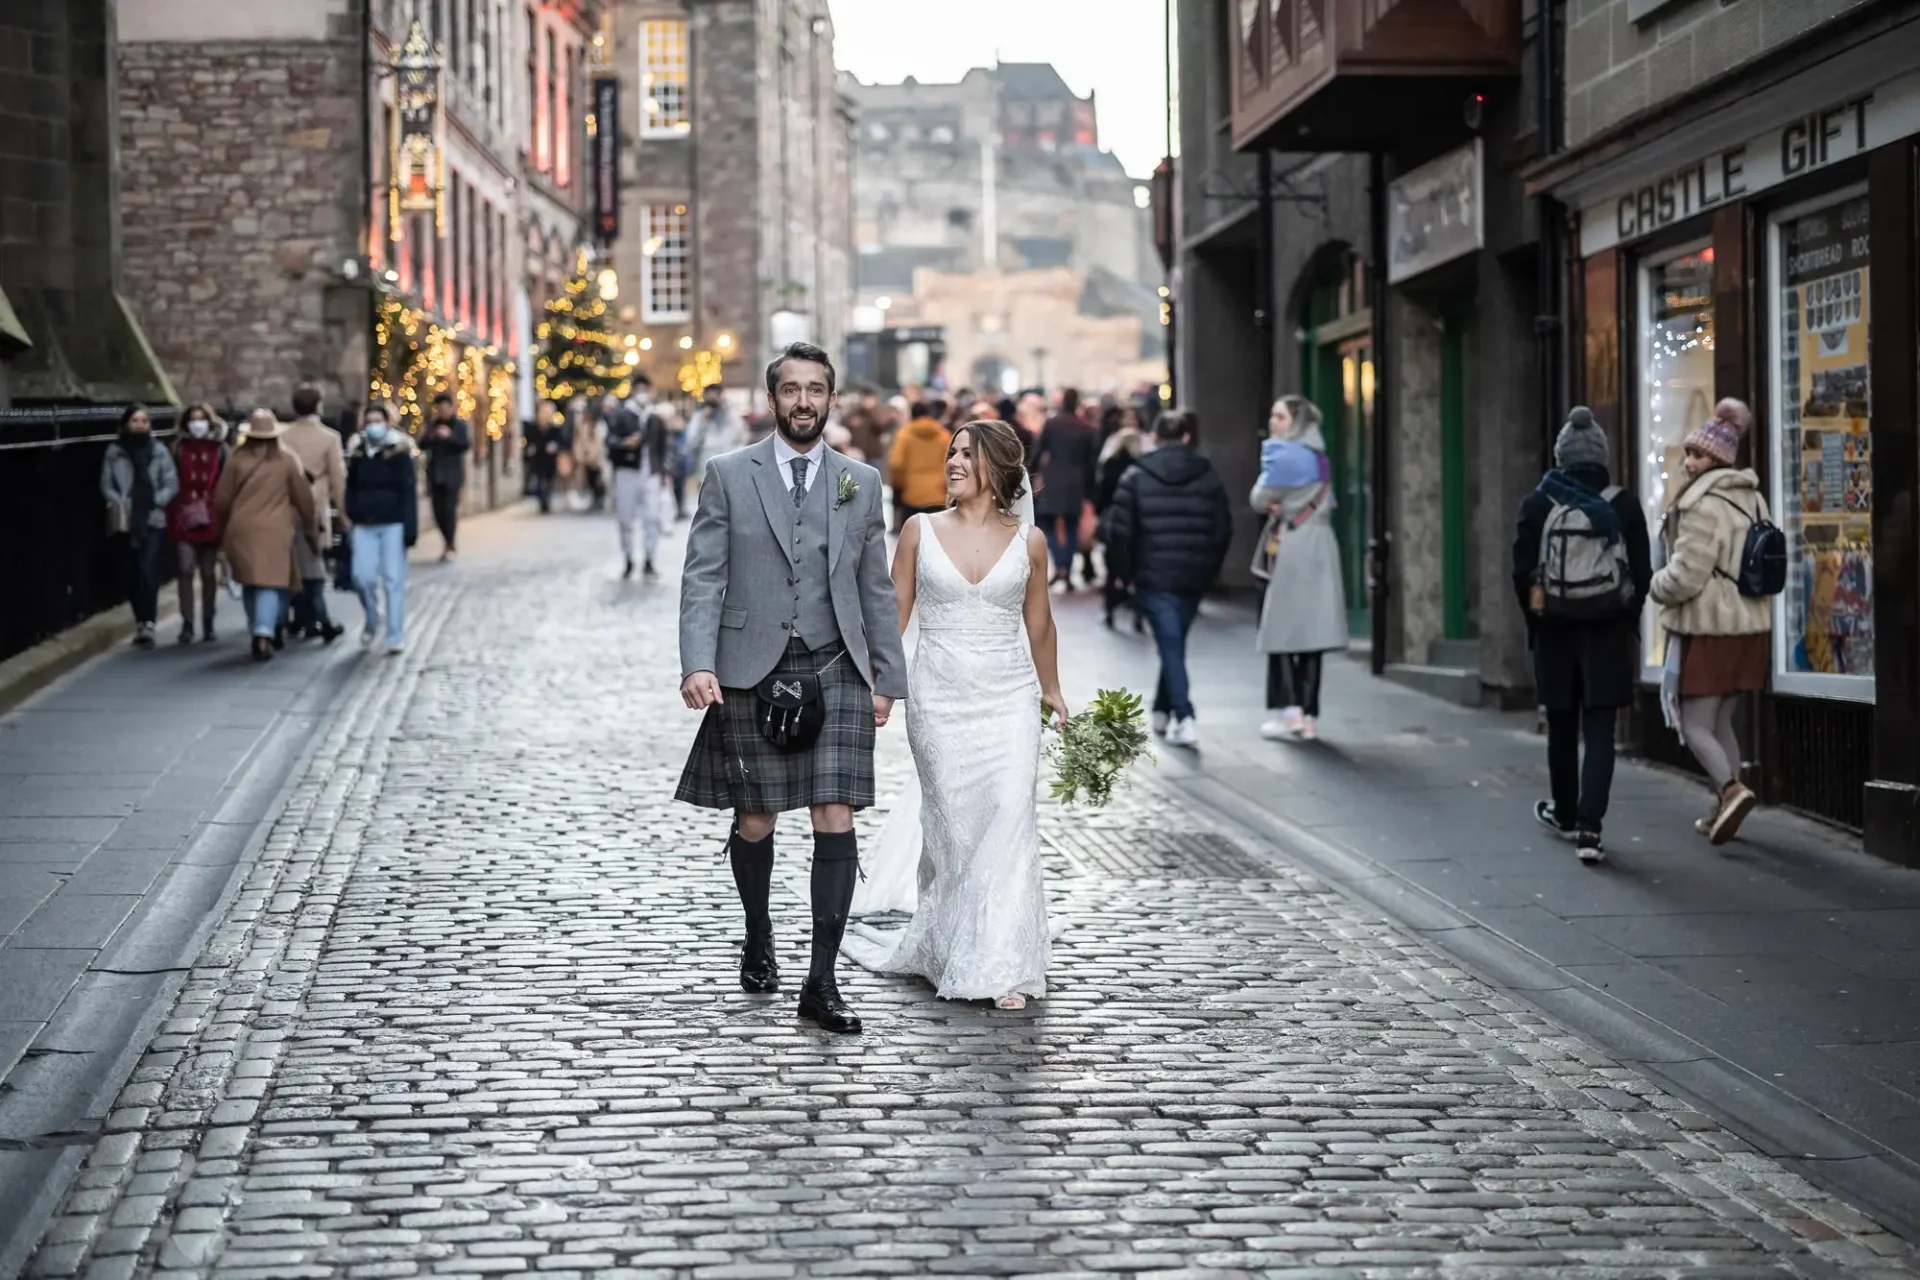 A newlywed couple, the groom in a kilt and the bride in a white dress, joyfully walk down a cobblestone street in a busy urban area adorned with festive lights.